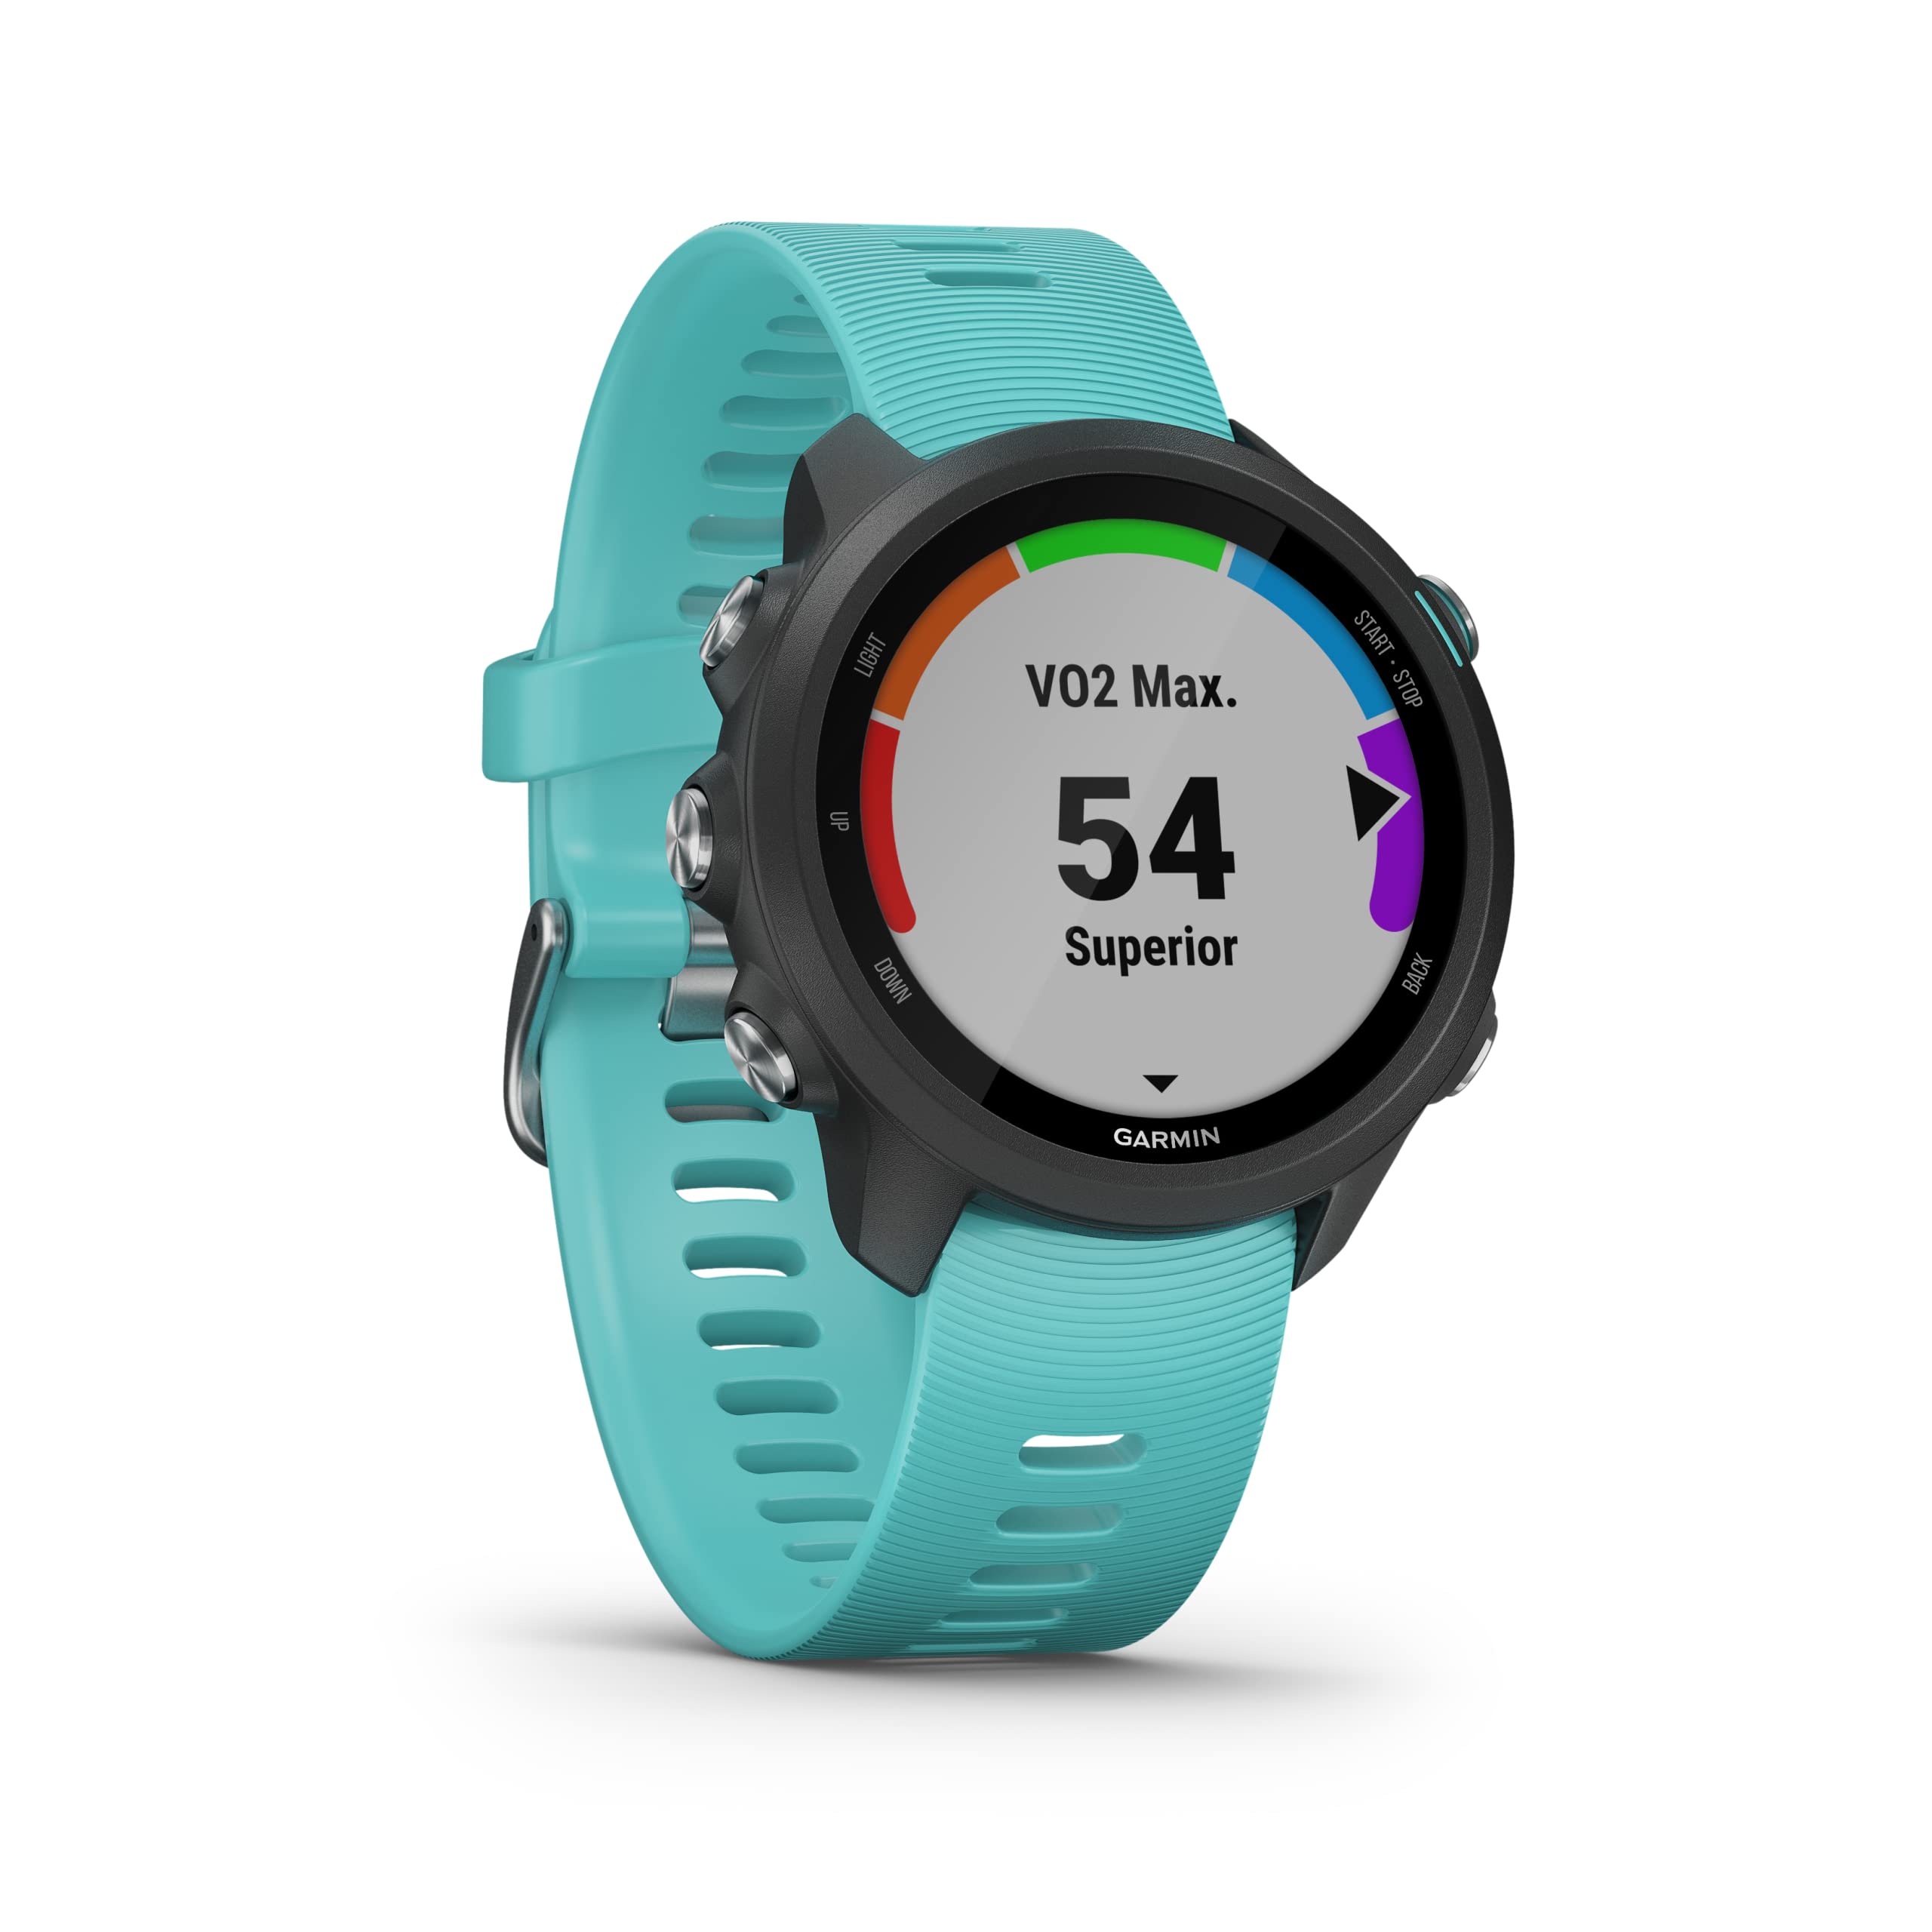 Garmin Forerunner 245 GPS Running Watch, with music and advanced training features, Black with Aqua Band